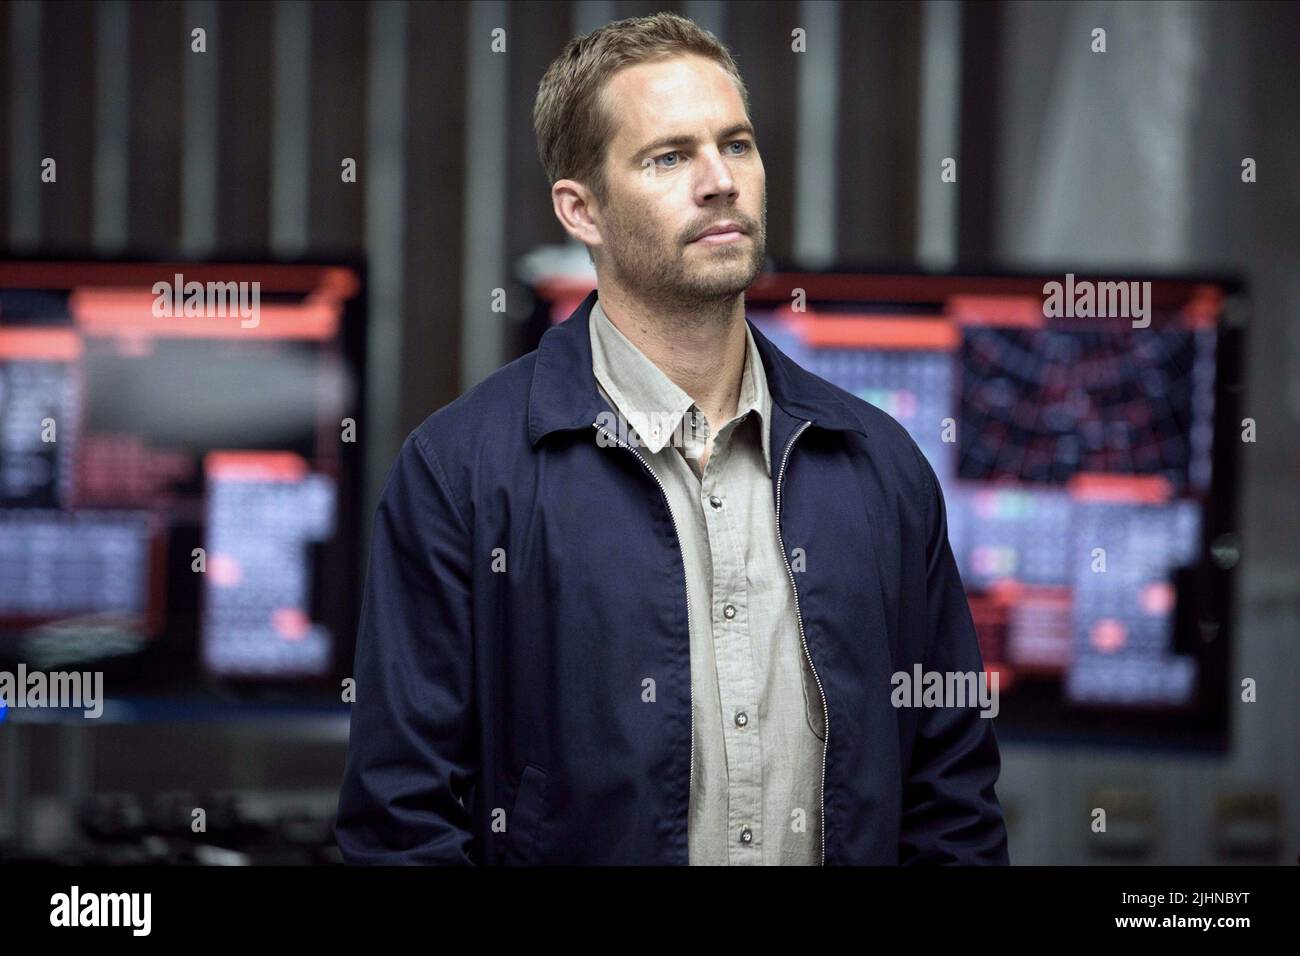 PAUL WALKER, Fast and Furious 6, 2013 Banque D'Images